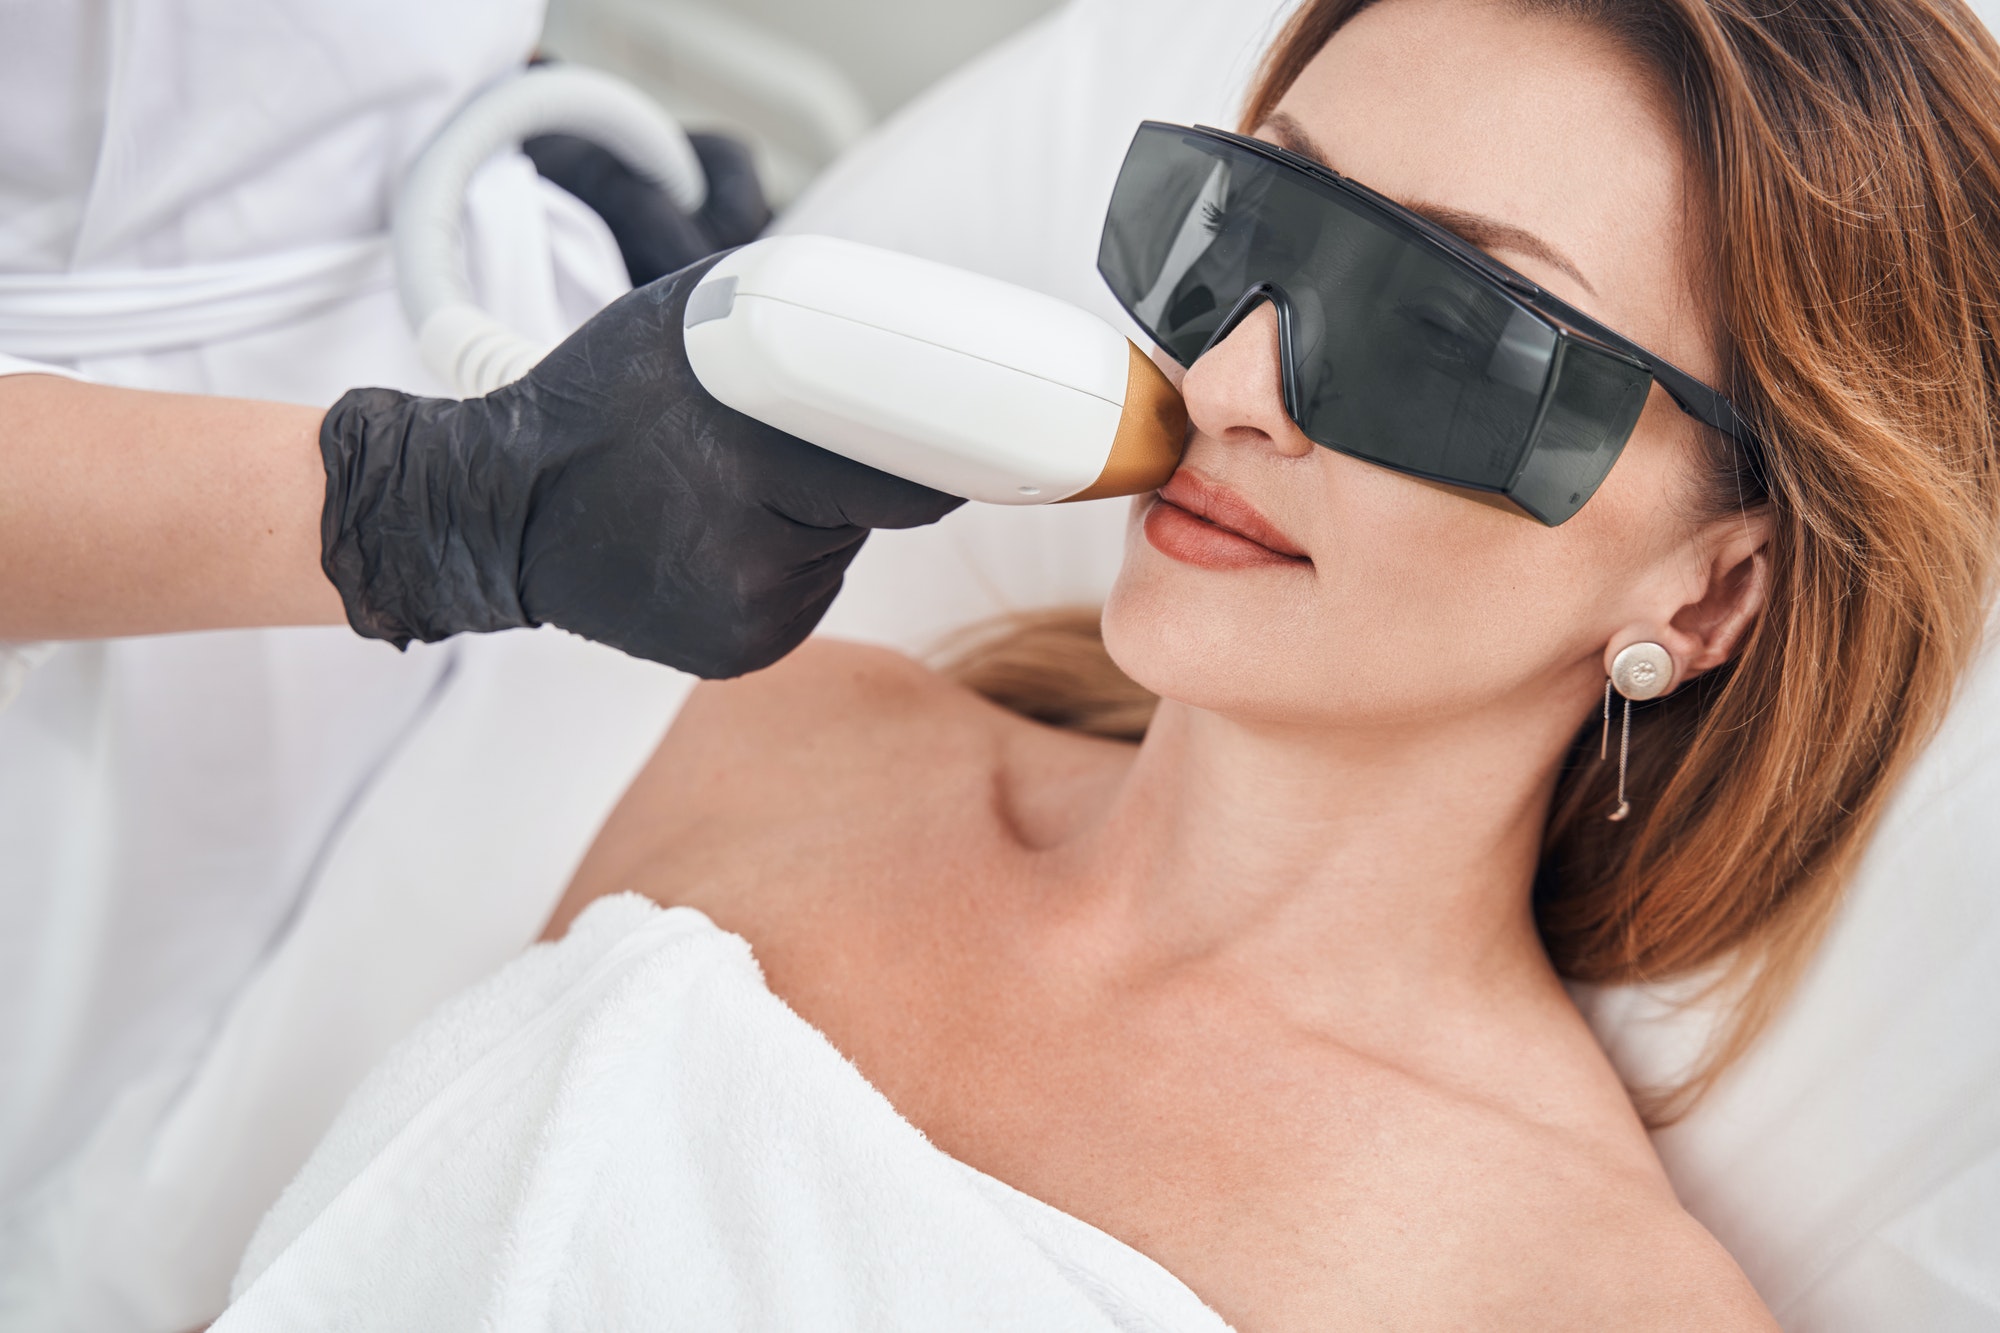 Relaxed pretty woman during face laser epilation